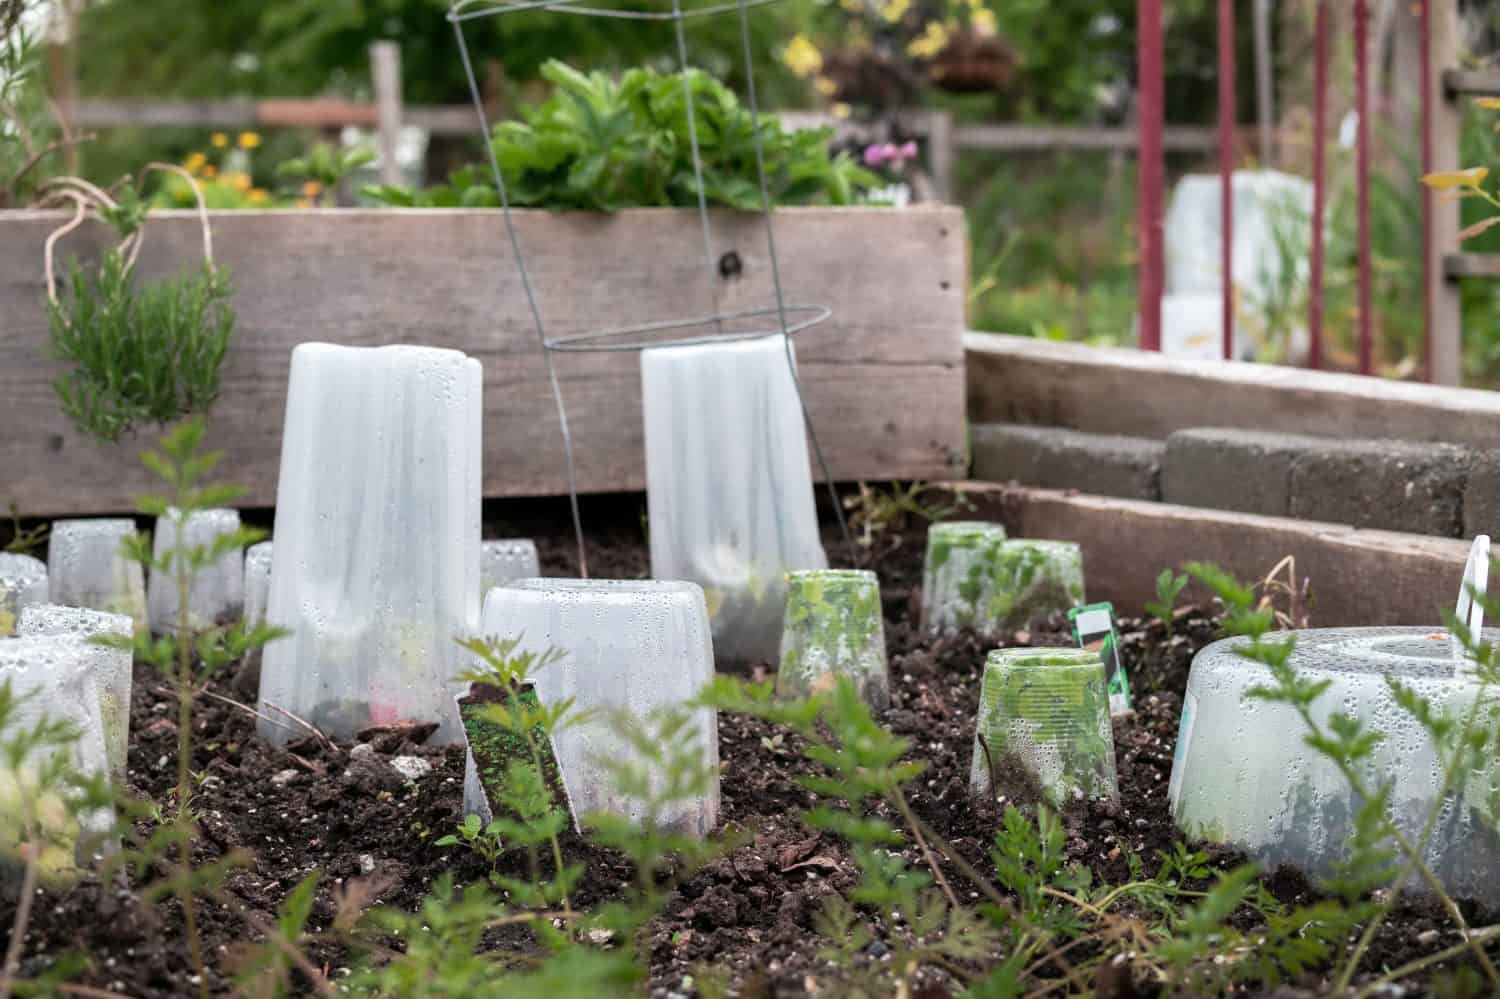 Vegetable plants covered with cloche to protect from frost, cold temperatures and rain. Many different sized plastic containers placed over young plant seedling in garden bed. Selective focus.